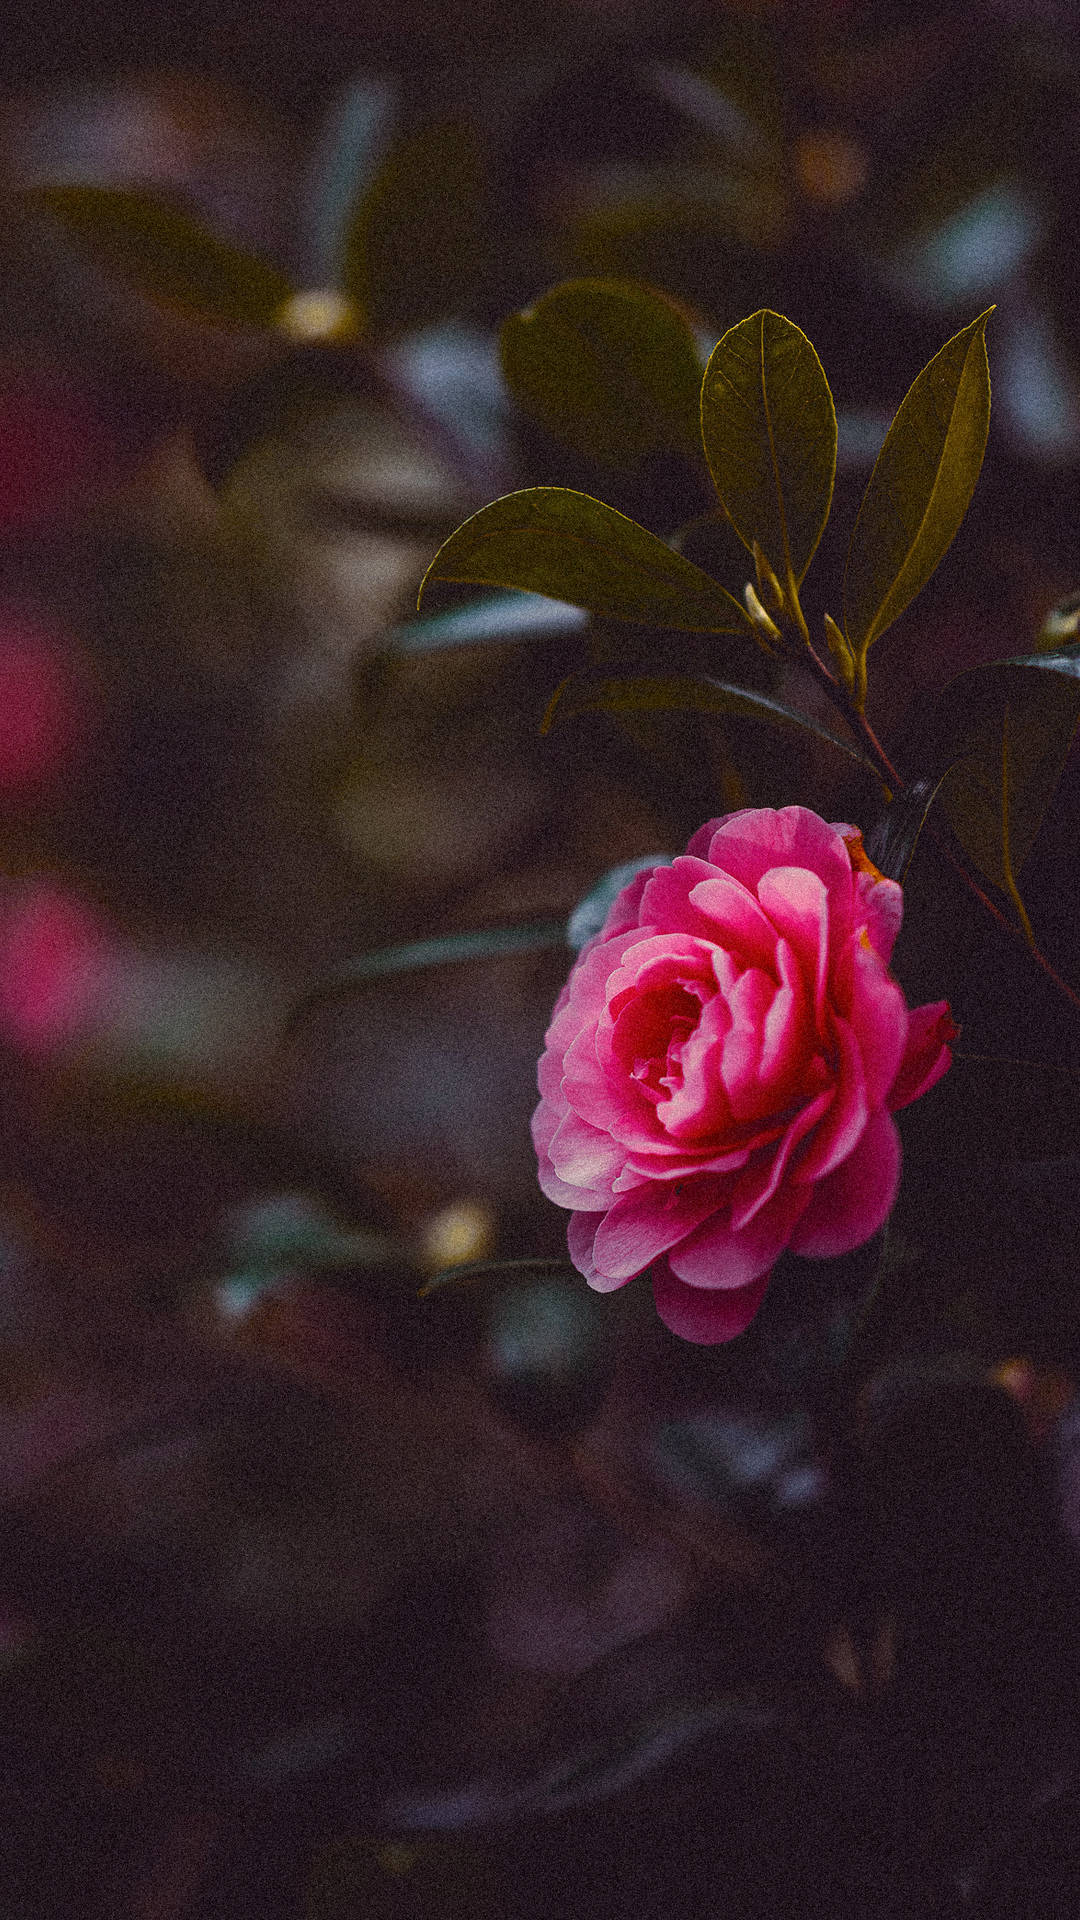 "blooming Aesthetic - Floral Glory For Your Iphone Screen" Wallpaper